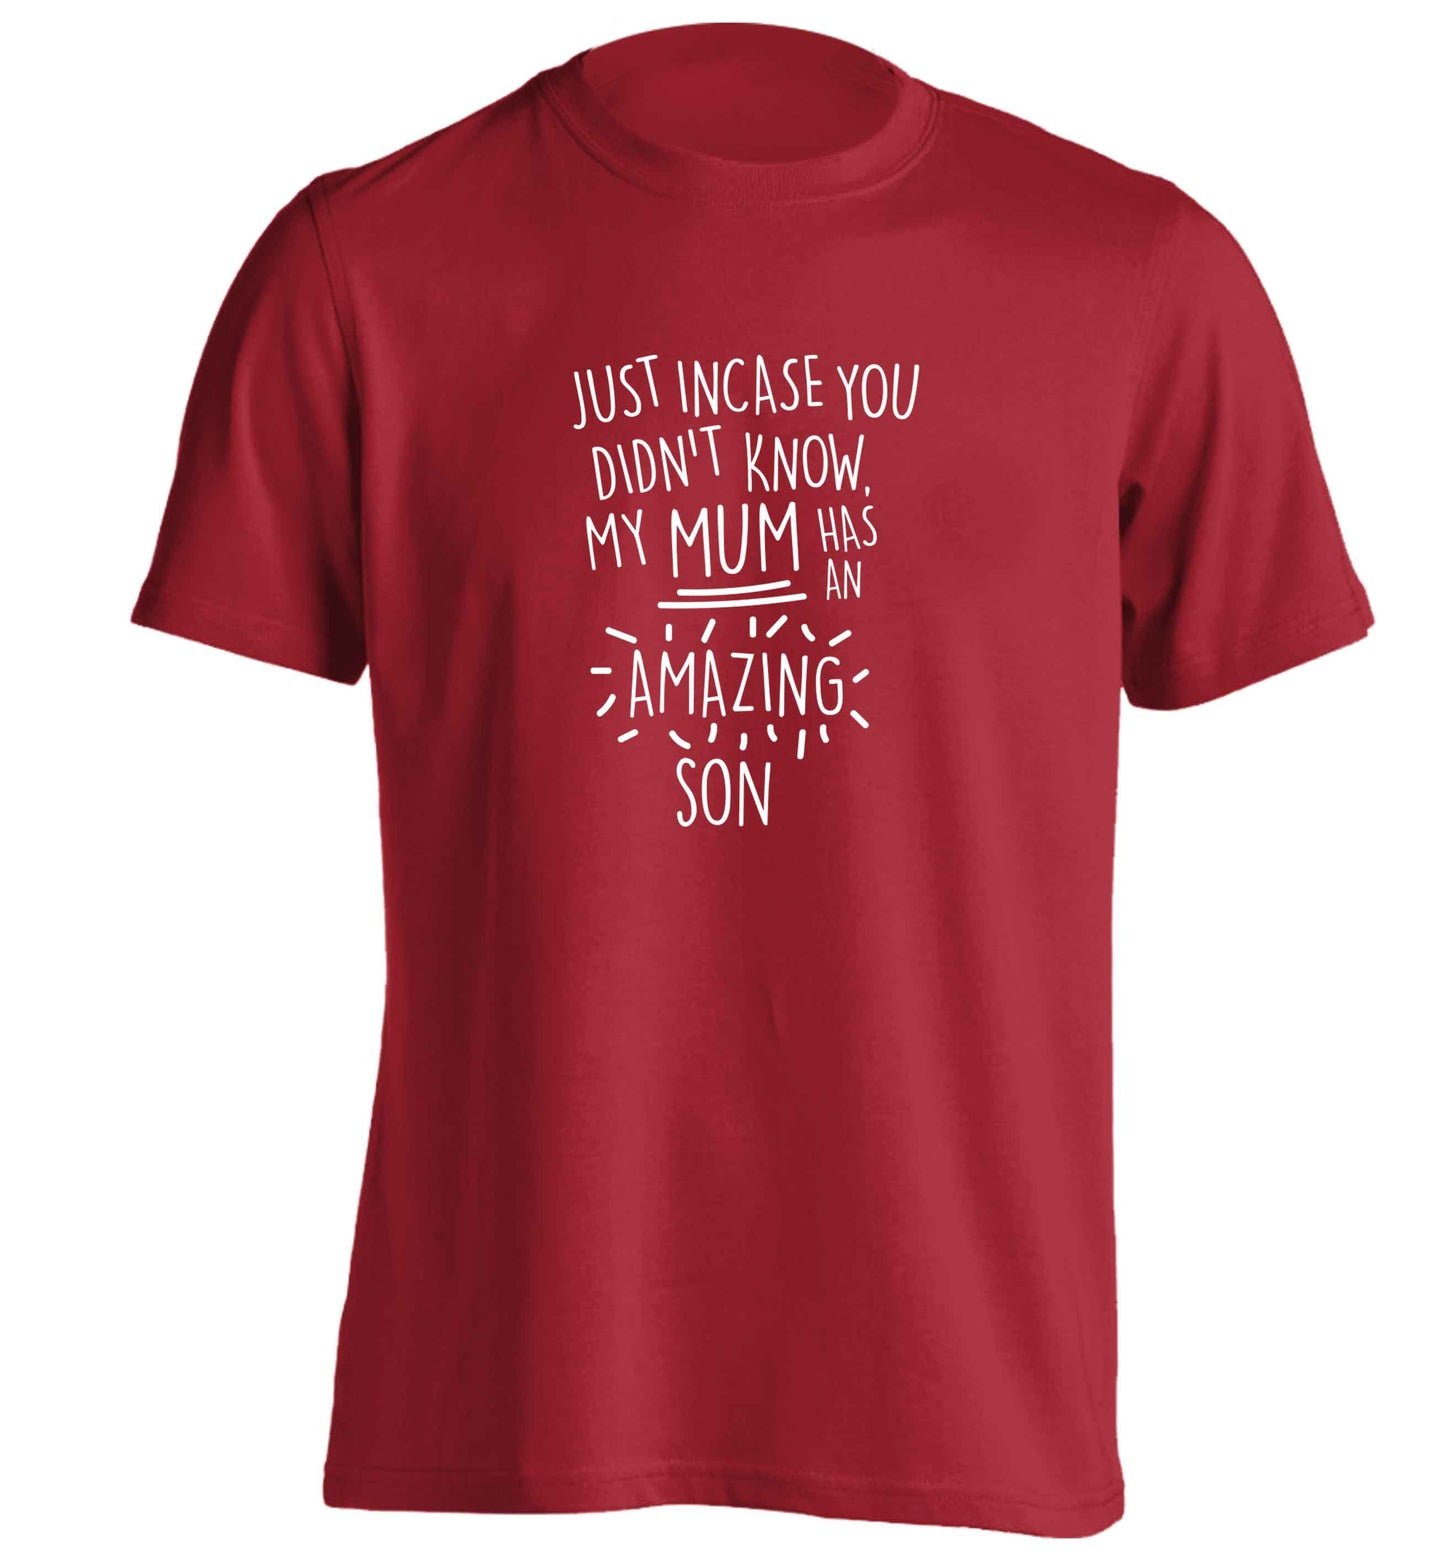 Just incase you didn't know my mum has an amazing son adults unisex red Tshirt 2XL